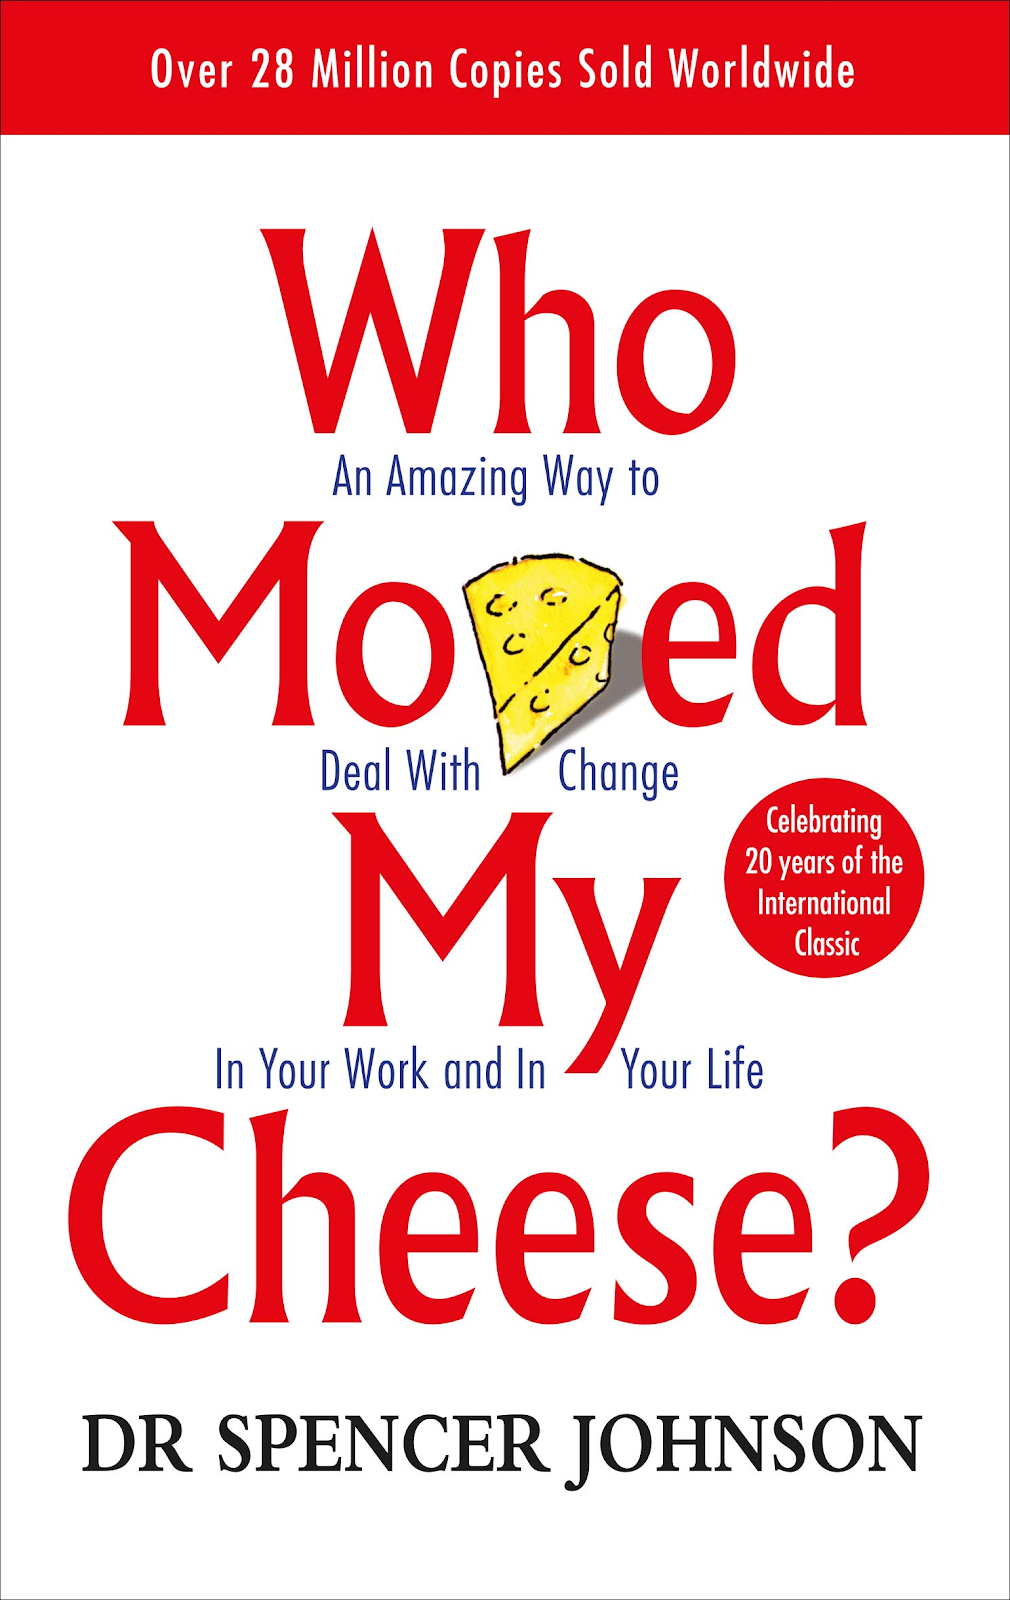 Das Buch „Who moved my cheese?“